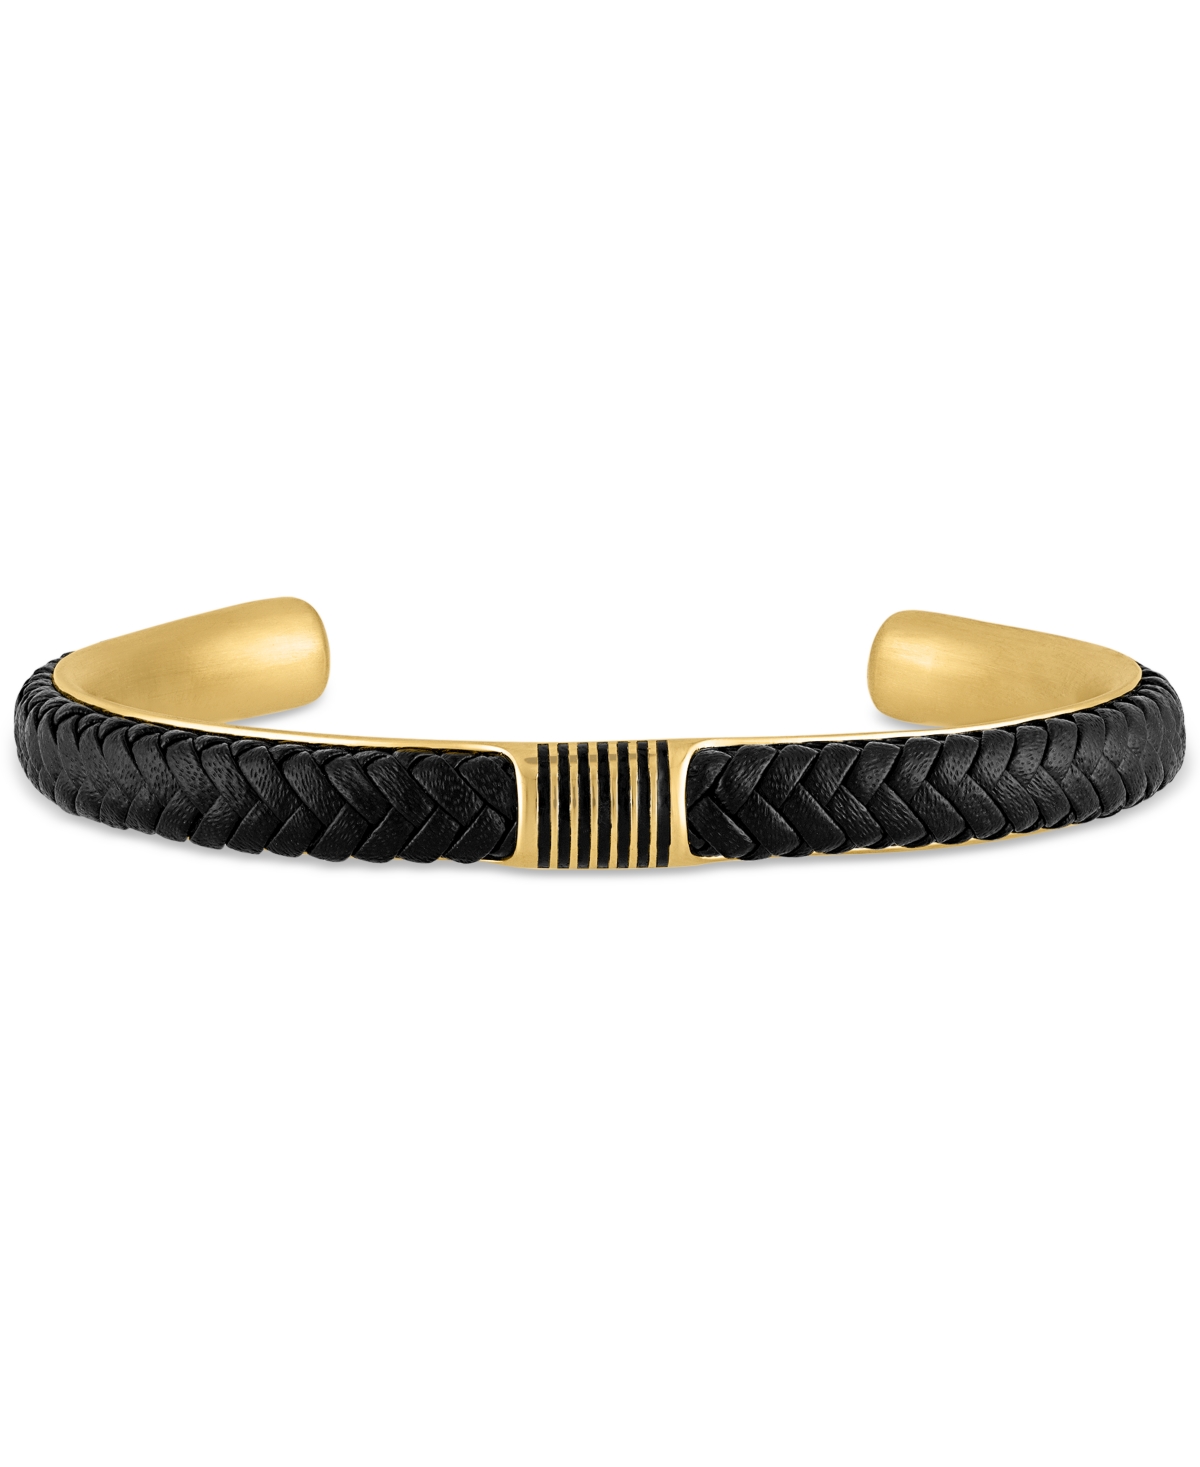 Esquire Men's Jewelry Woven Leather Cuff Bracelet In Gold-tone Ion-plated Stainless Steel, Created For Macy's In Black